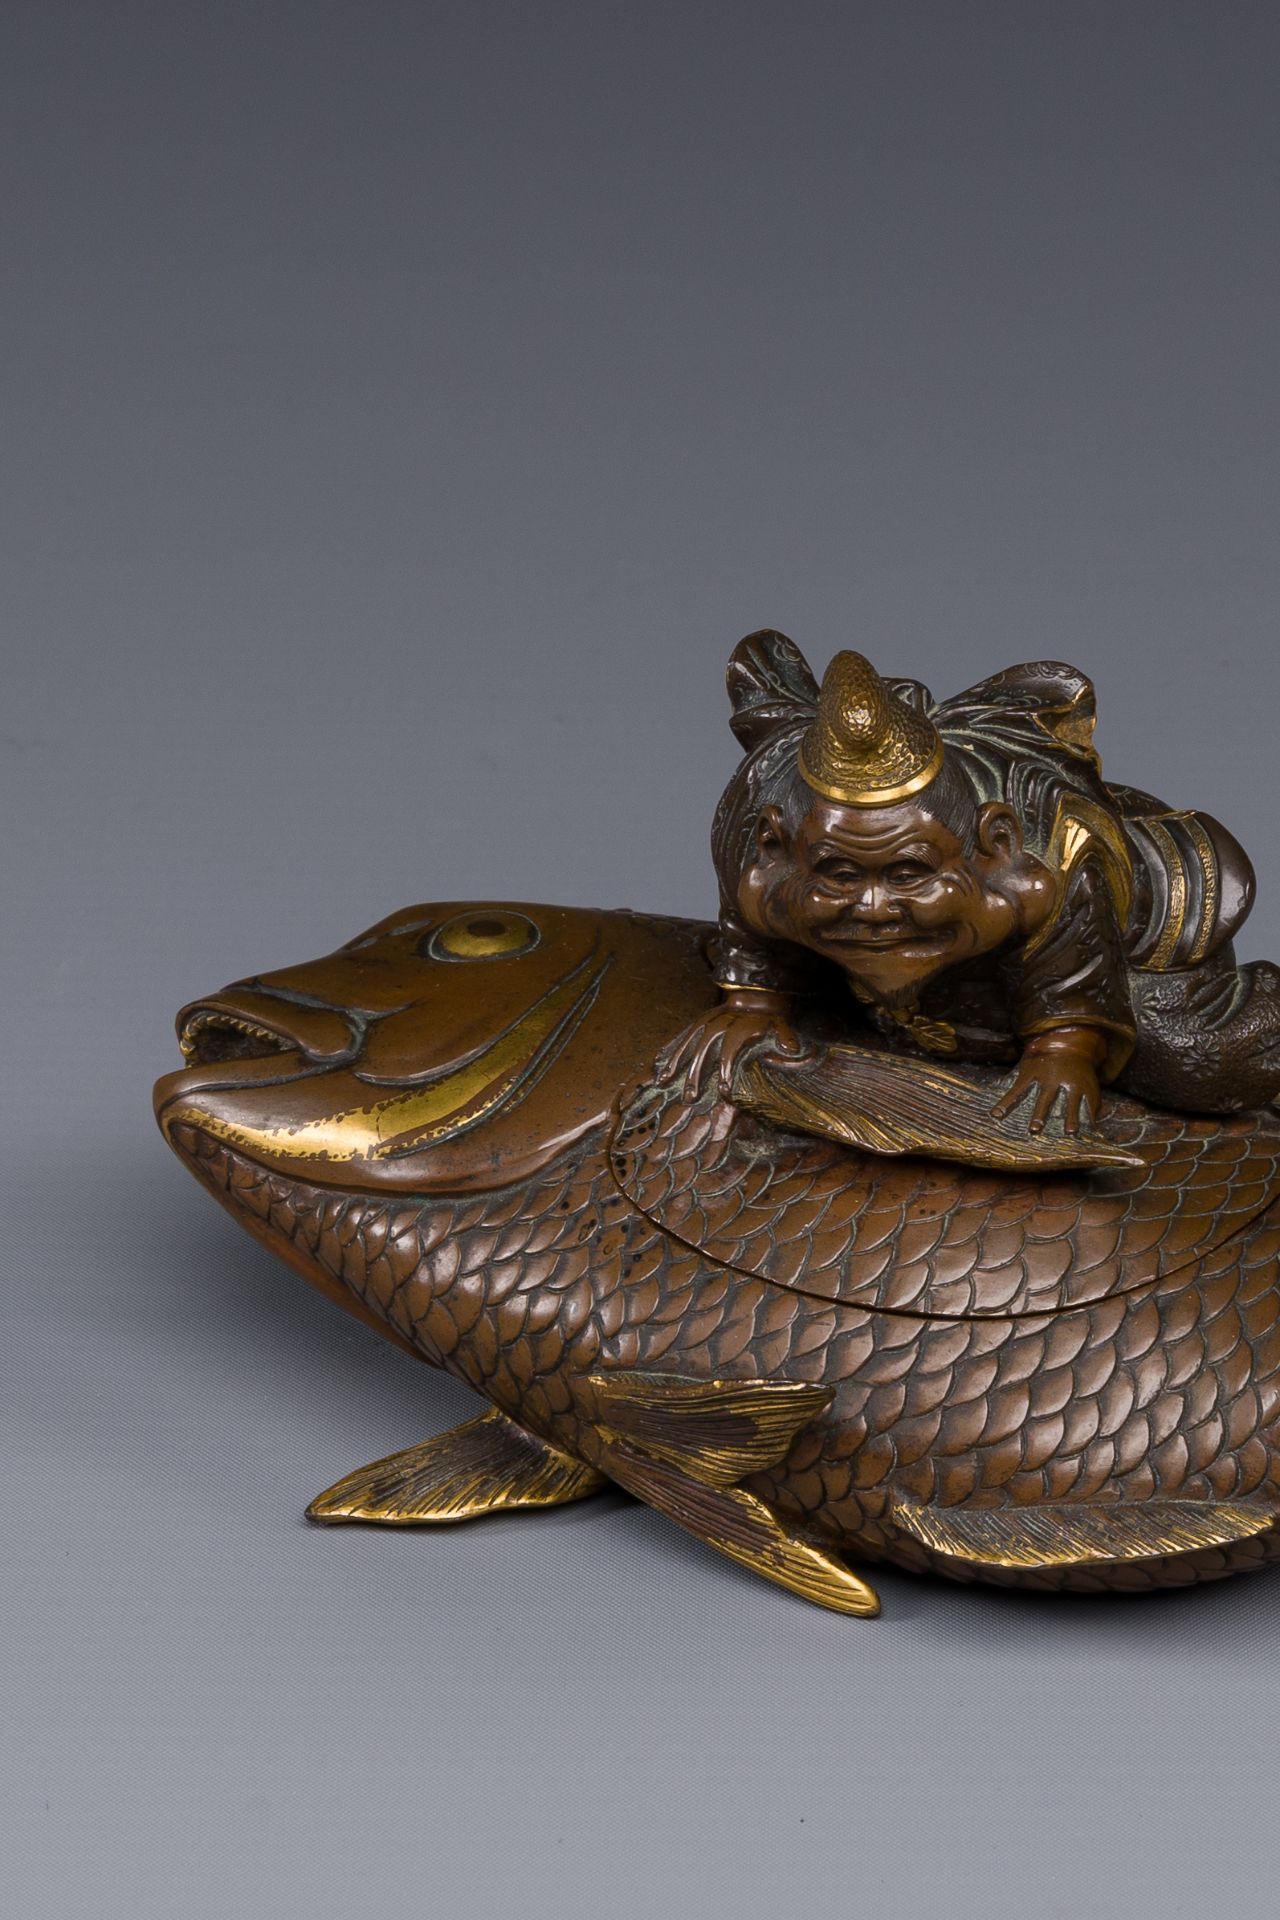 A Japanese partly gilded bronze lidded box in the shape of Ebisu on sea bream, signed Miyao Zo, Meij - Image 10 of 10